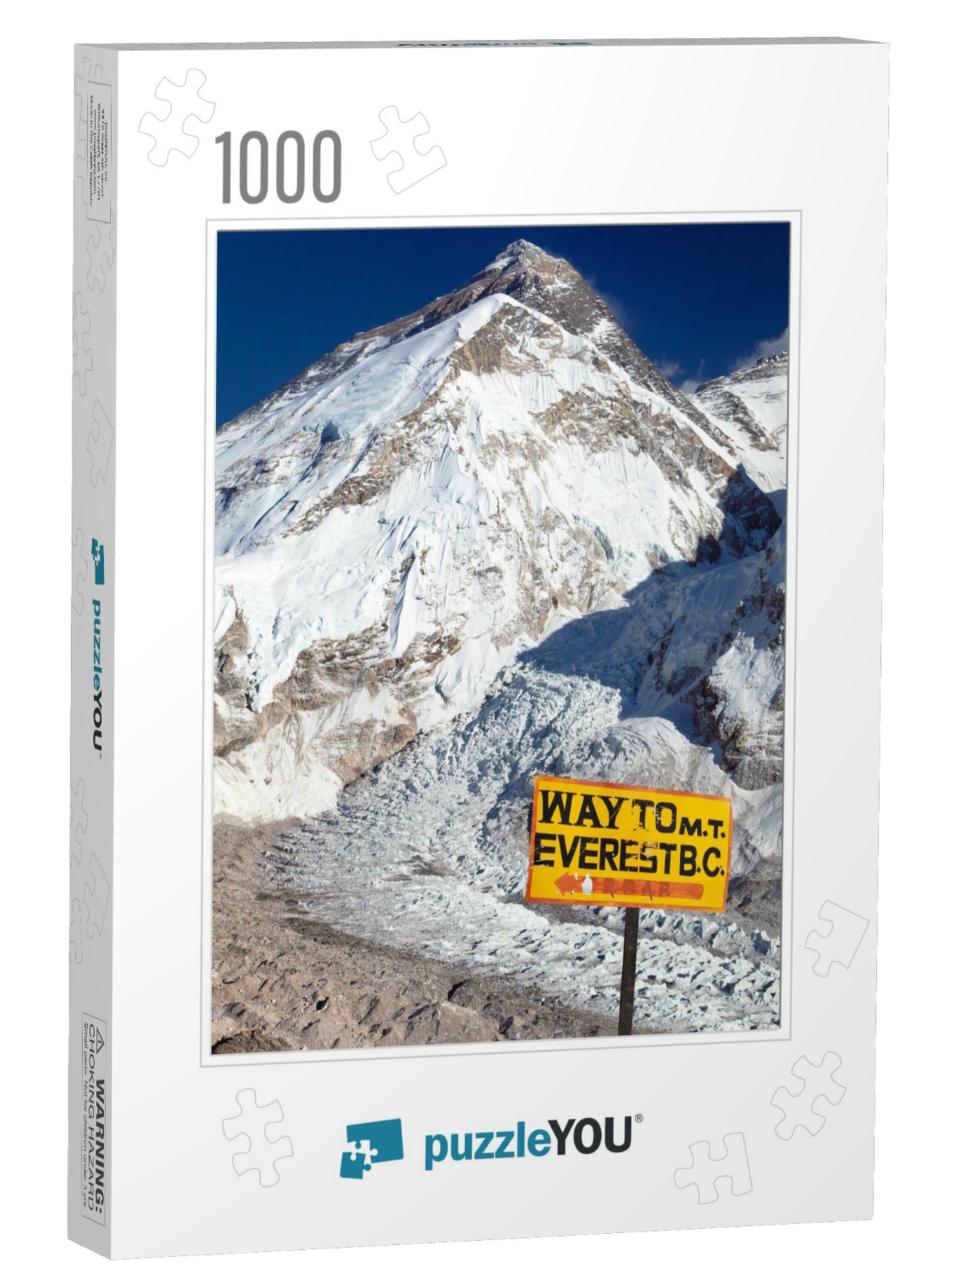 Signpost Way to Mount Everest B. C. & Top of Mount Everes... Jigsaw Puzzle with 1000 pieces